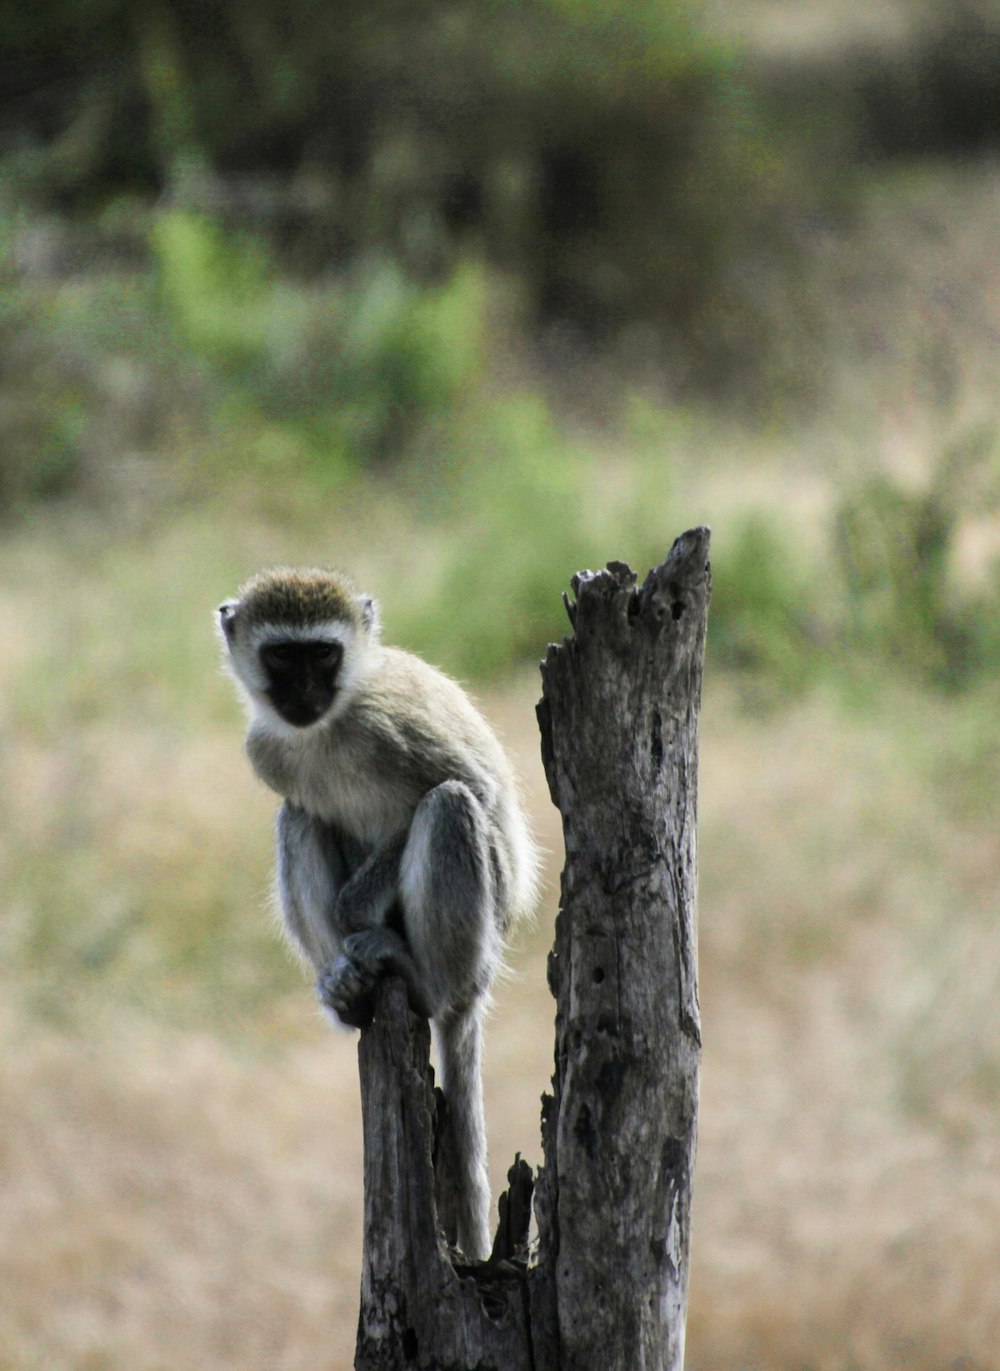 gray and black monkey on brown tree branch during daytime